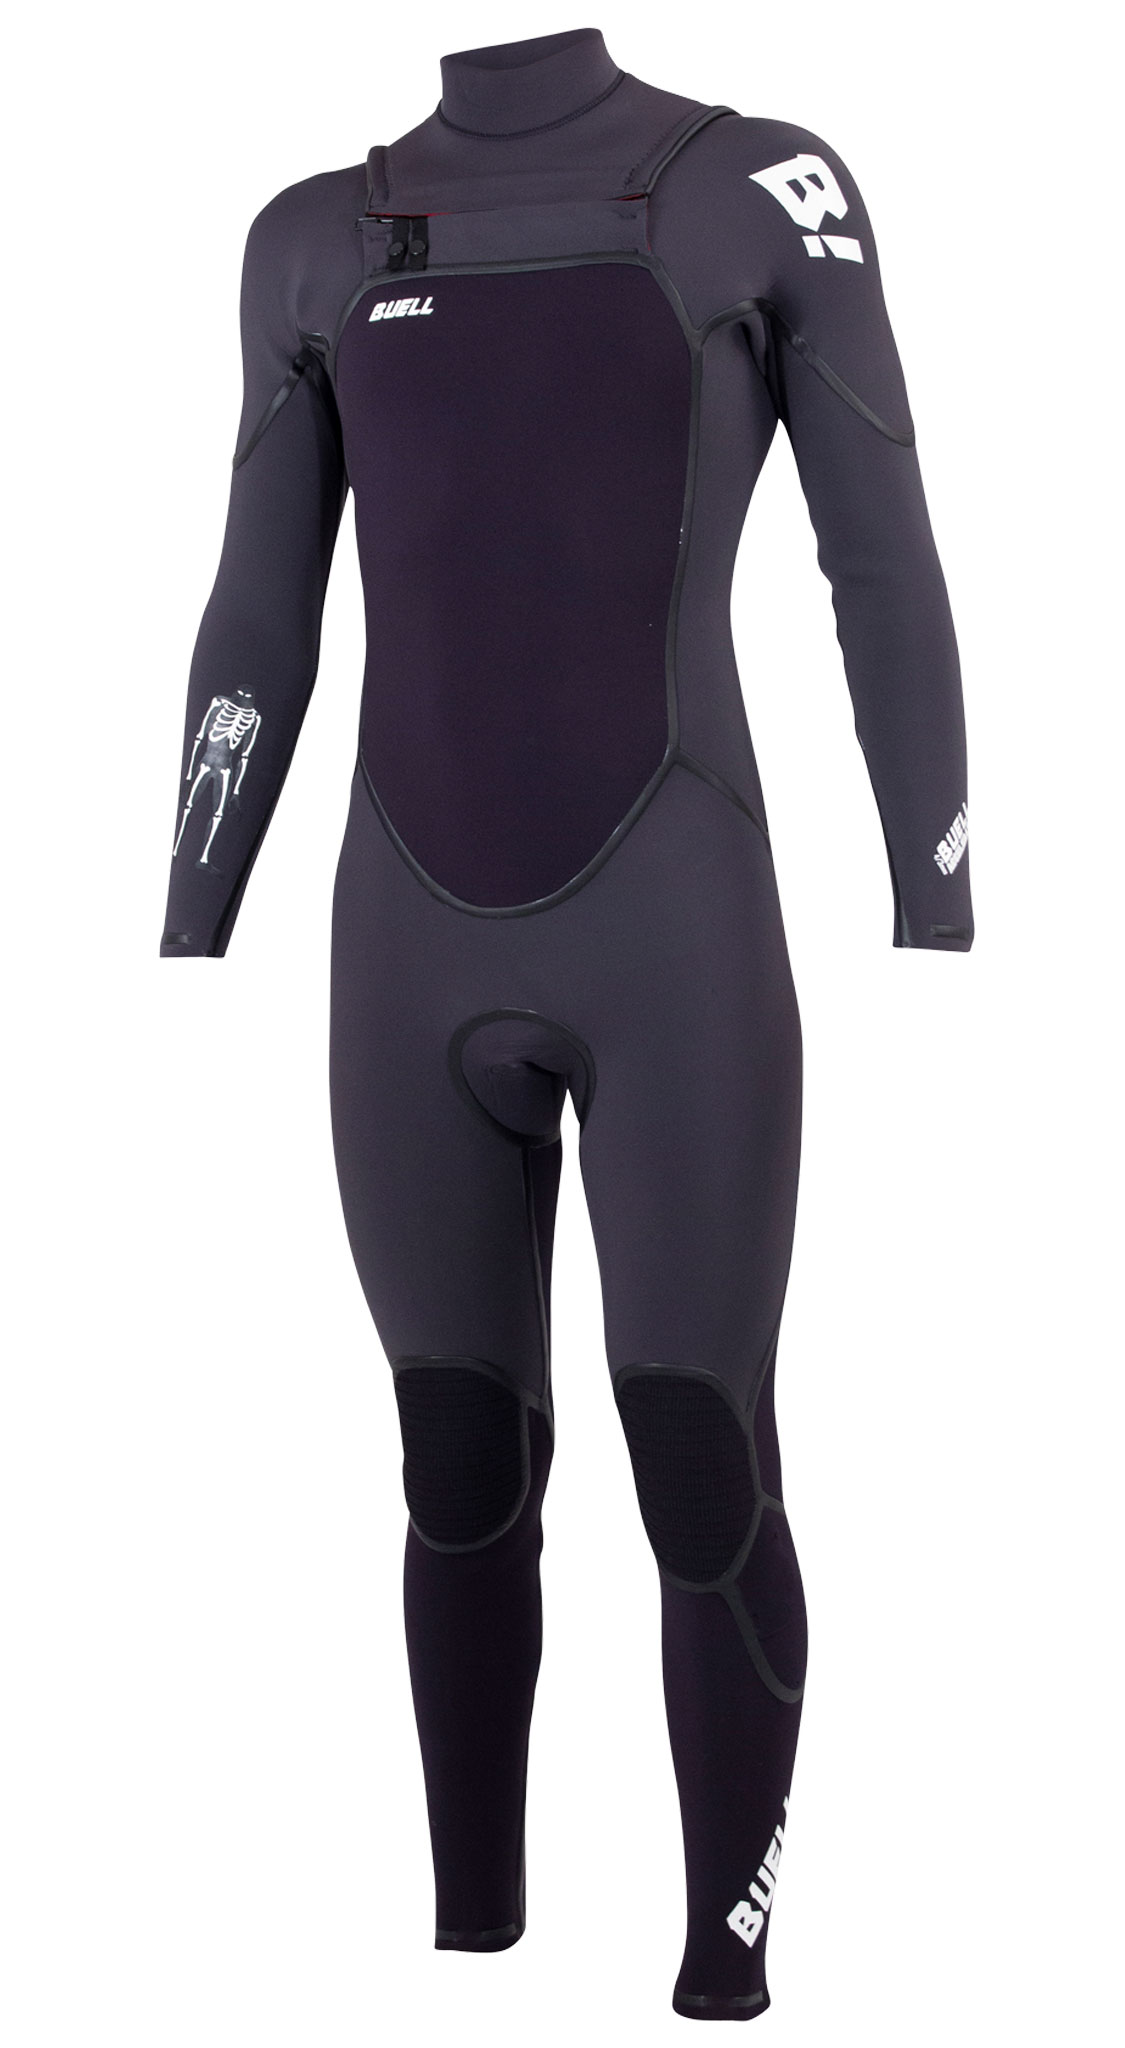 Buell RB1 Wetsuit Review